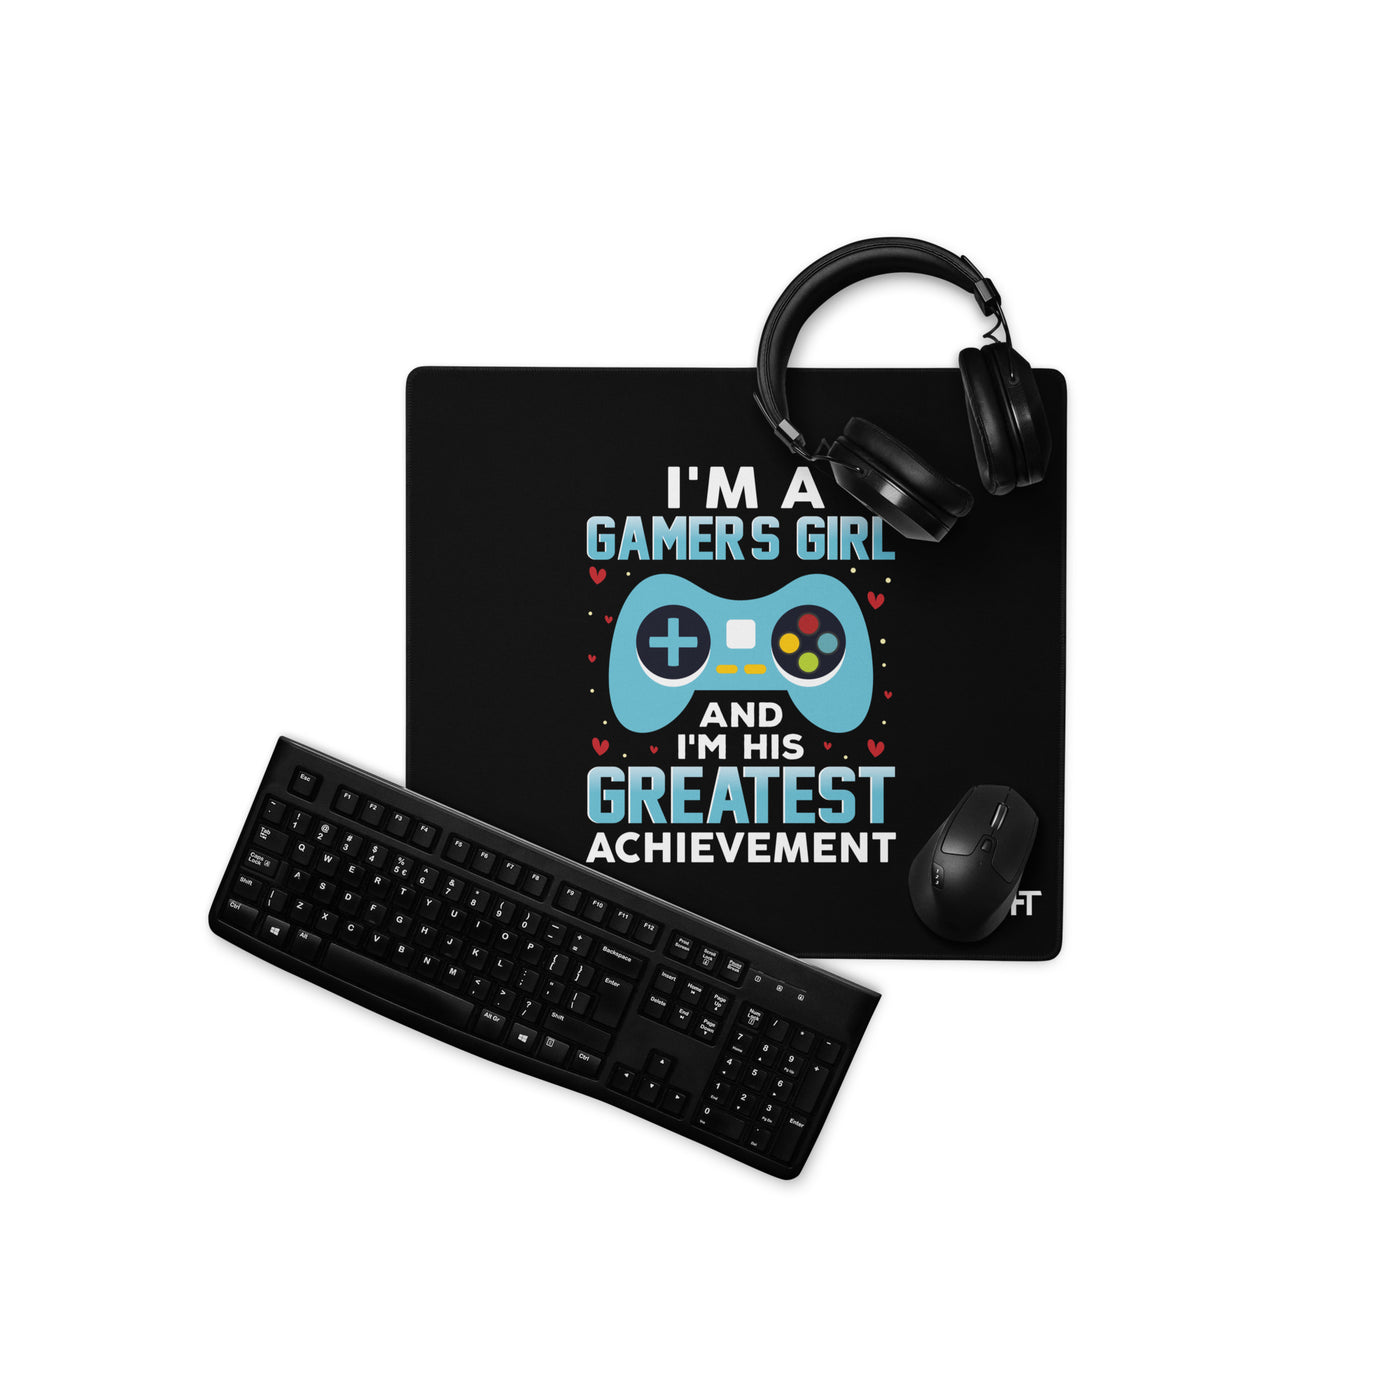 I am a Gamer's Girl, I am his Greatest Achievement (turquoise text ) - Desk Mat